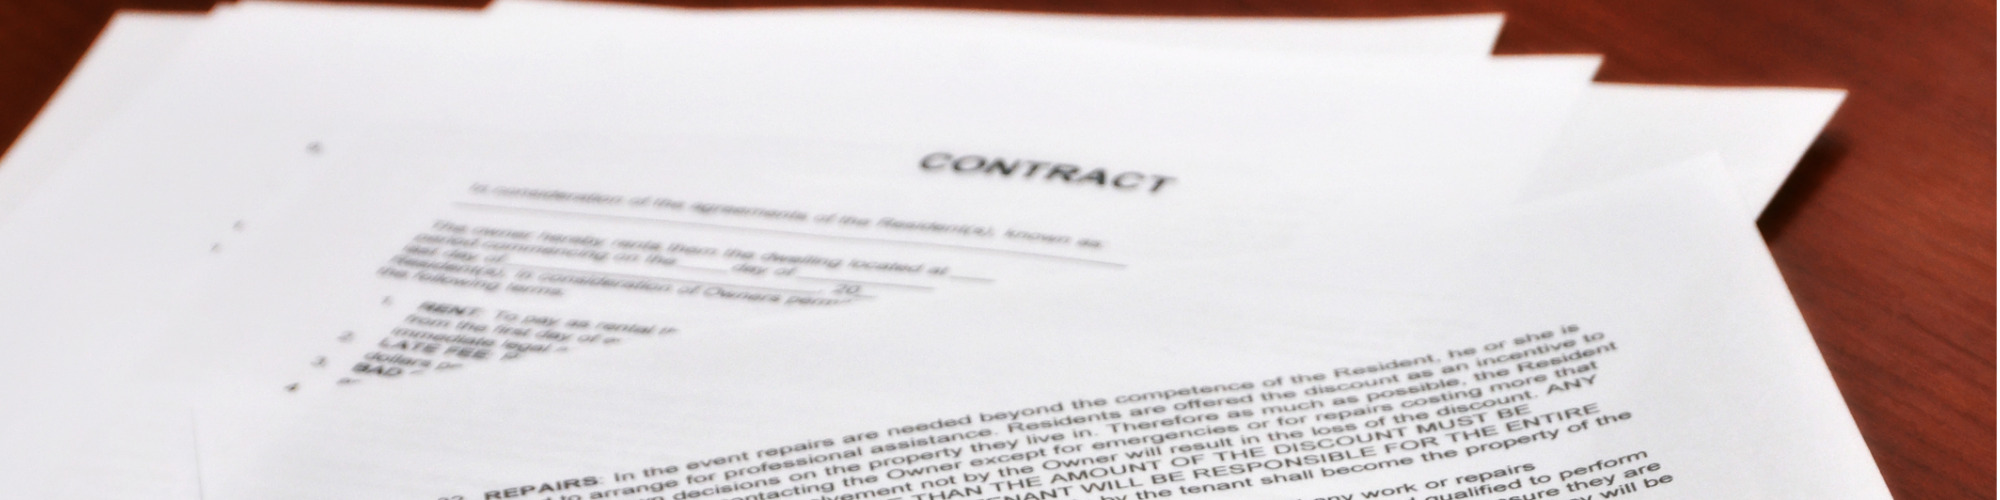 Consumer Contracts - Drafting Issues Explored